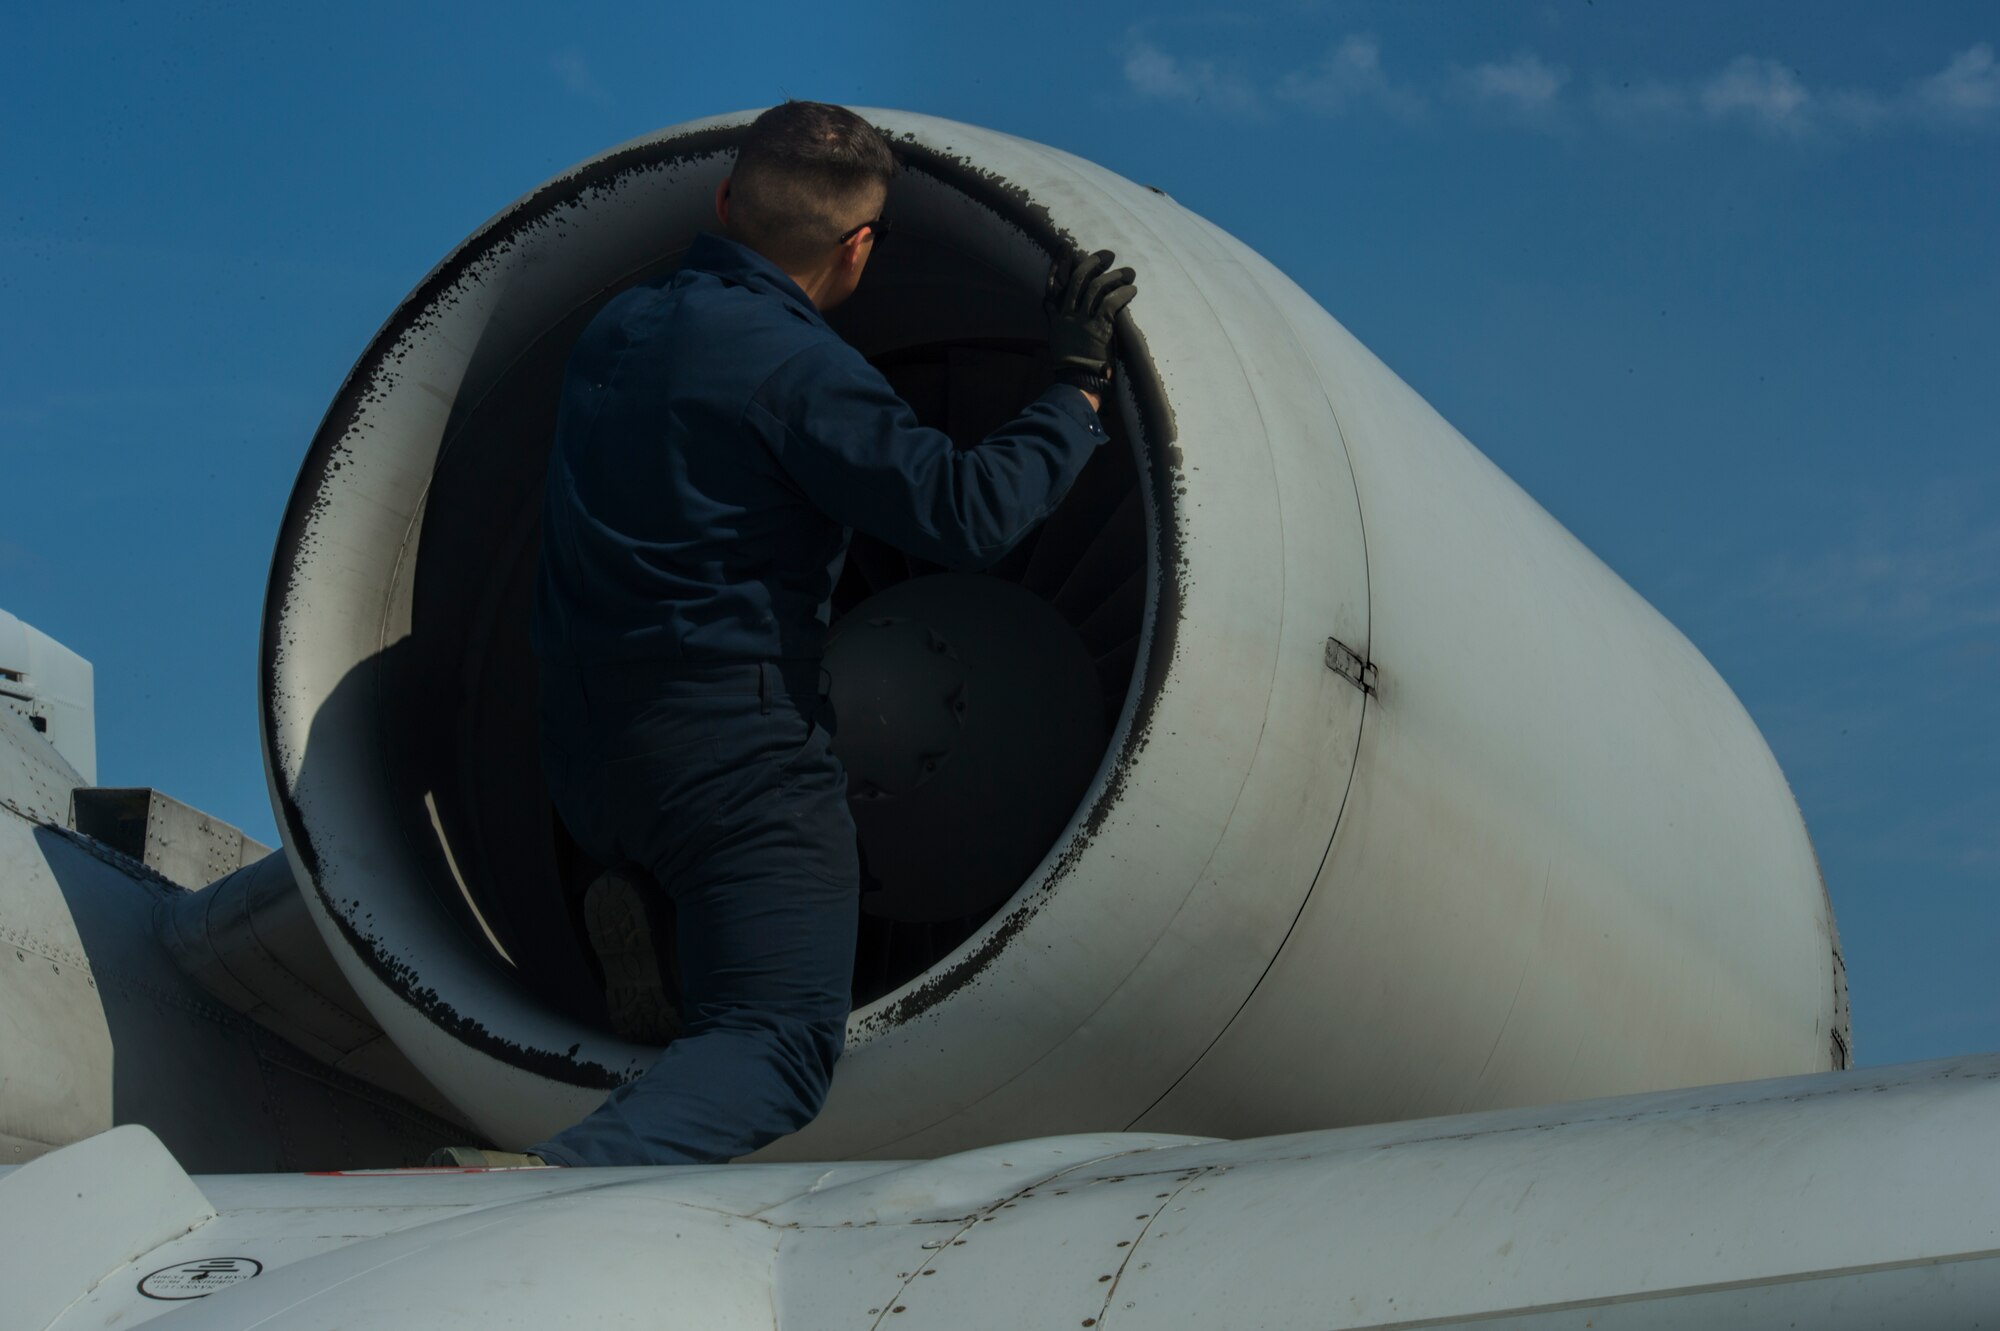 A 354th Expeditionary Fighter Squadron crew chief inspects the engine of a U.S. Air Force A-10 Thunderbolt II attack aircraft during a theater security package deployment to Namest Air Base, Czech Republic, April 9, 2015. Pre- and post-flight inspections are performed on the aircraft to ensure it is safe to fly. (U.S. Air Force photo by Staff Sgt. Christopher Ruano/Released) 